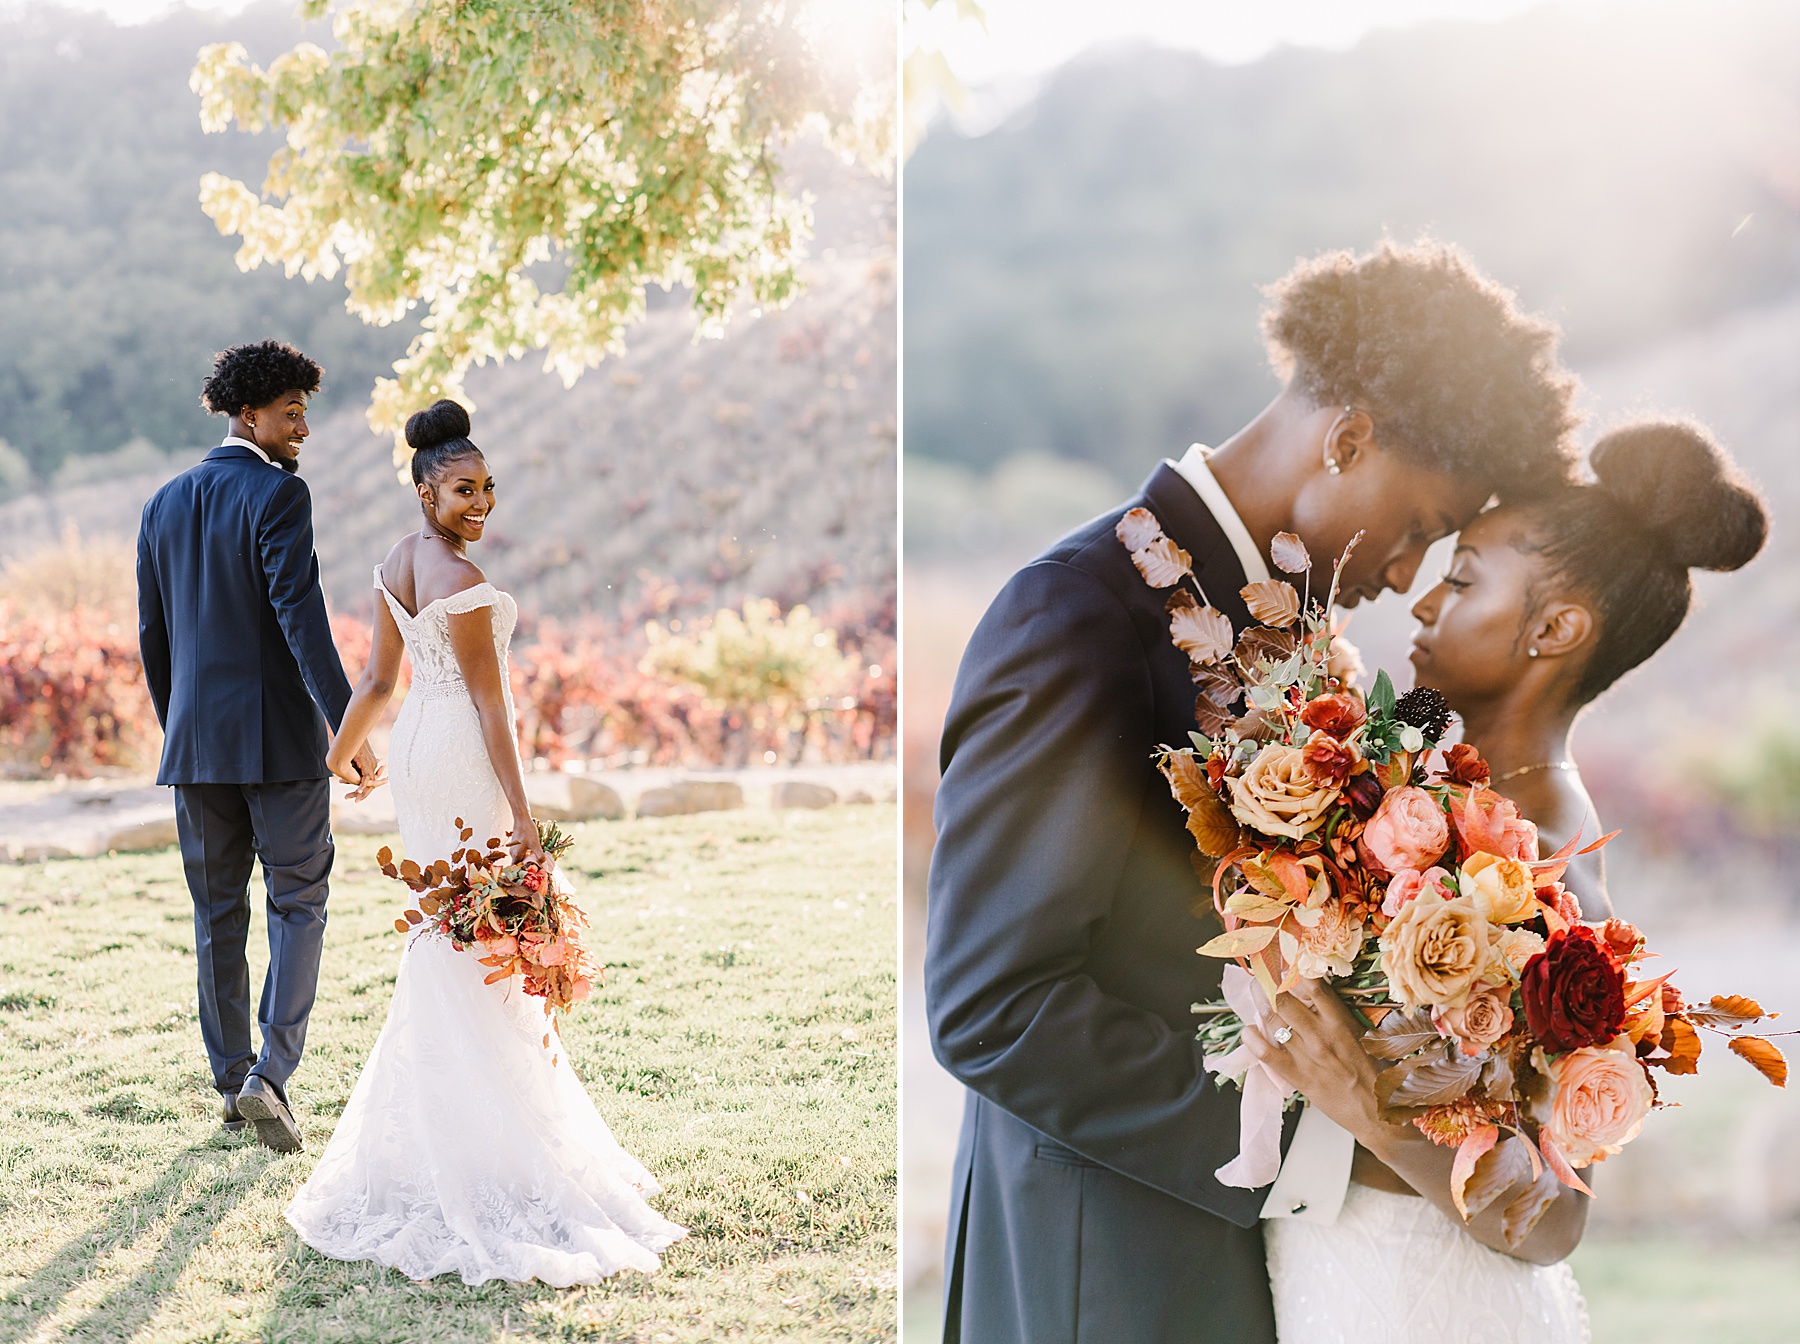 Wondering when to plan your wedding date? Check out Nikkels Photography, a California-based Wedding Photographers's recommendations.